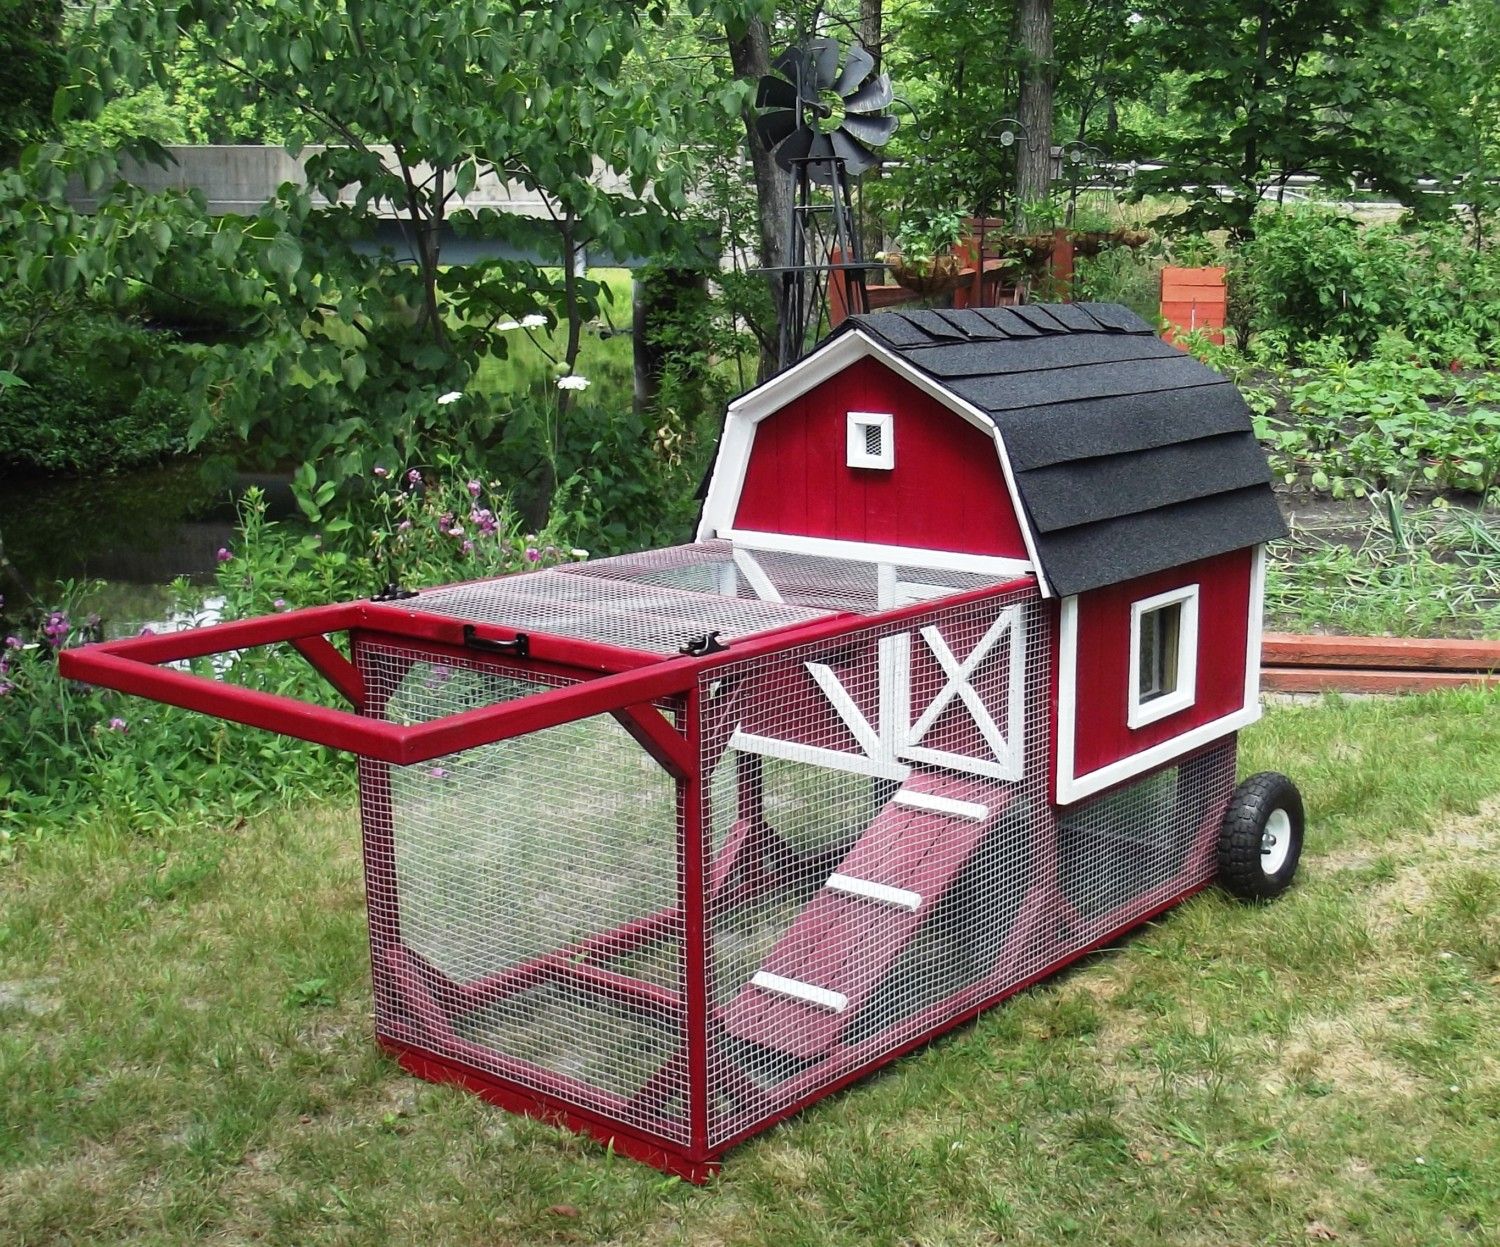 The Little Red Barn Chicken Tractor By Bkeee - BackYard Chickens ...